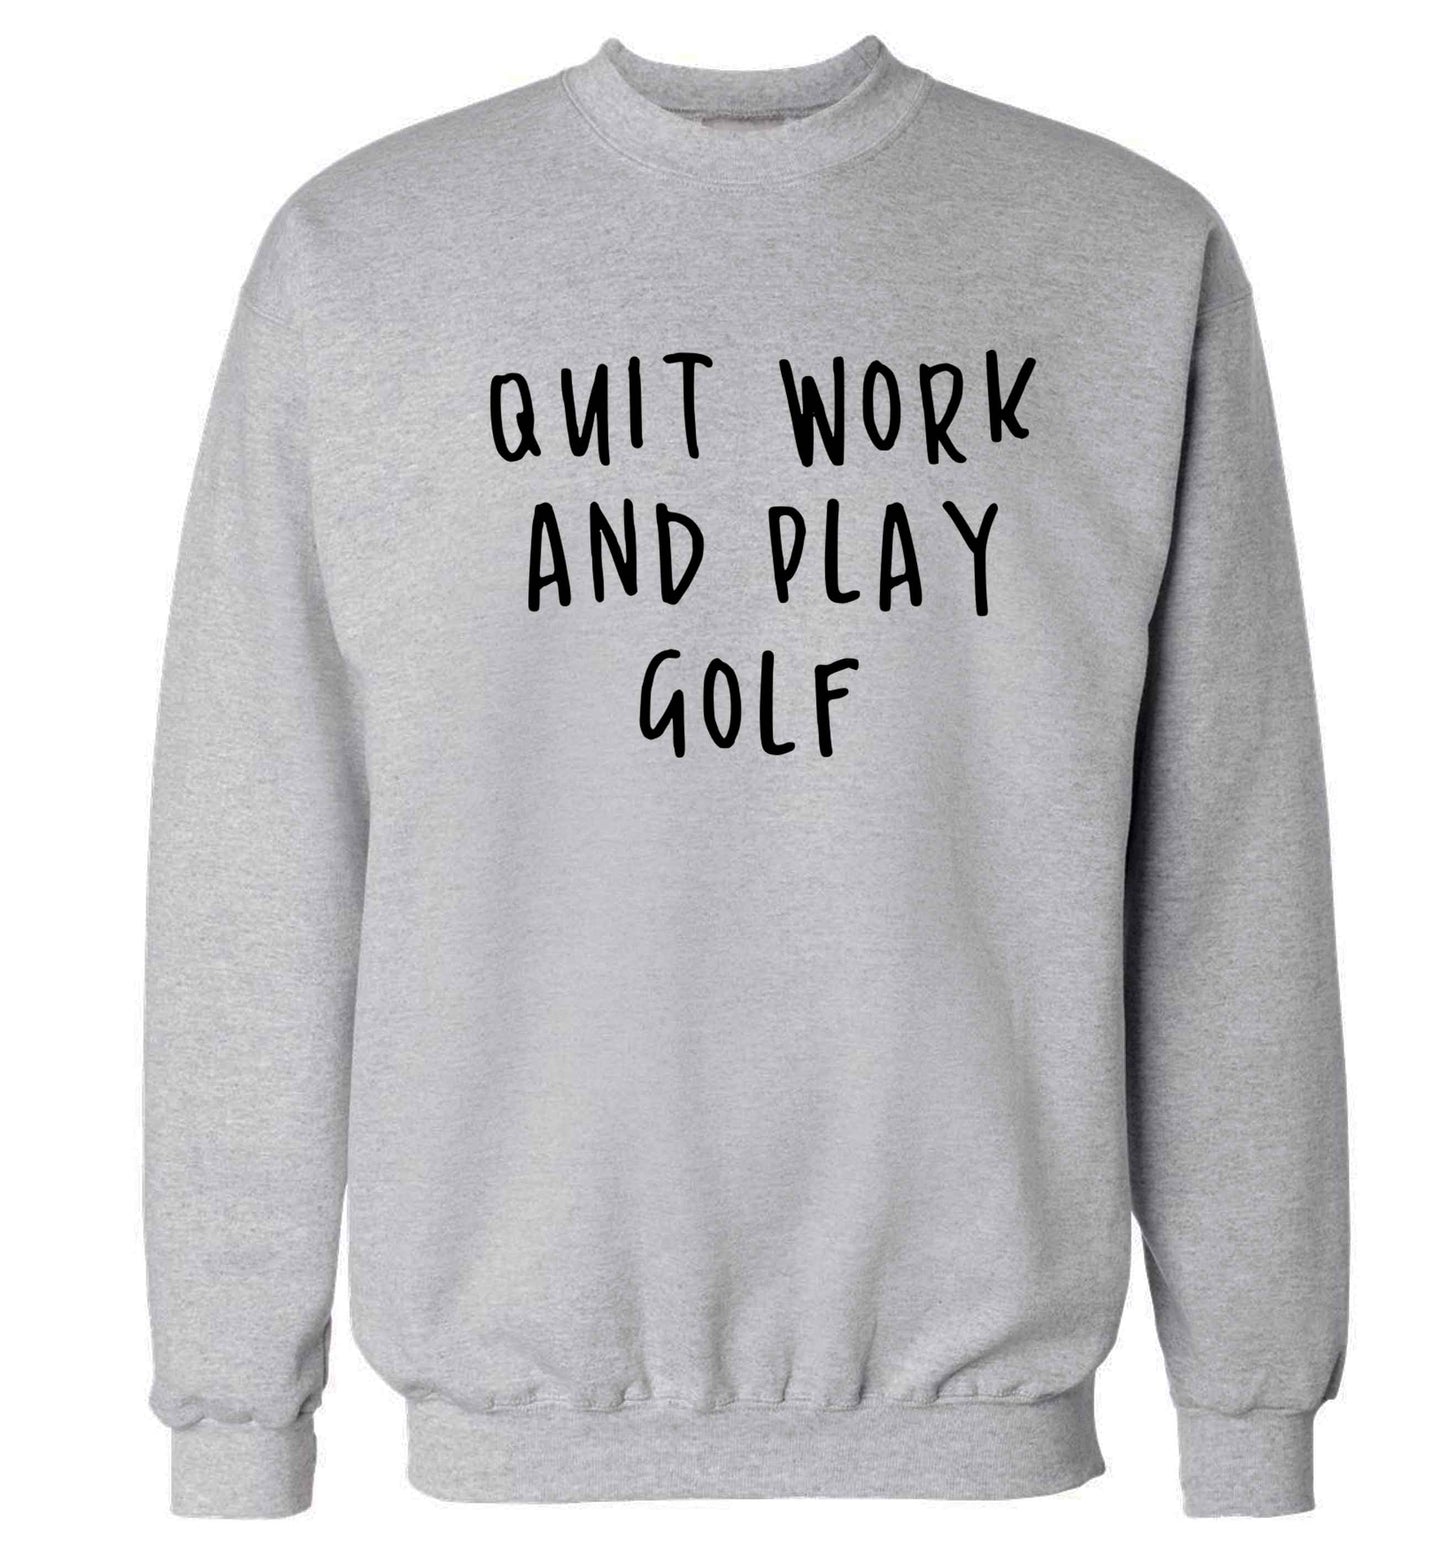 Quit work and play golf Adult's unisex grey Sweater 2XL